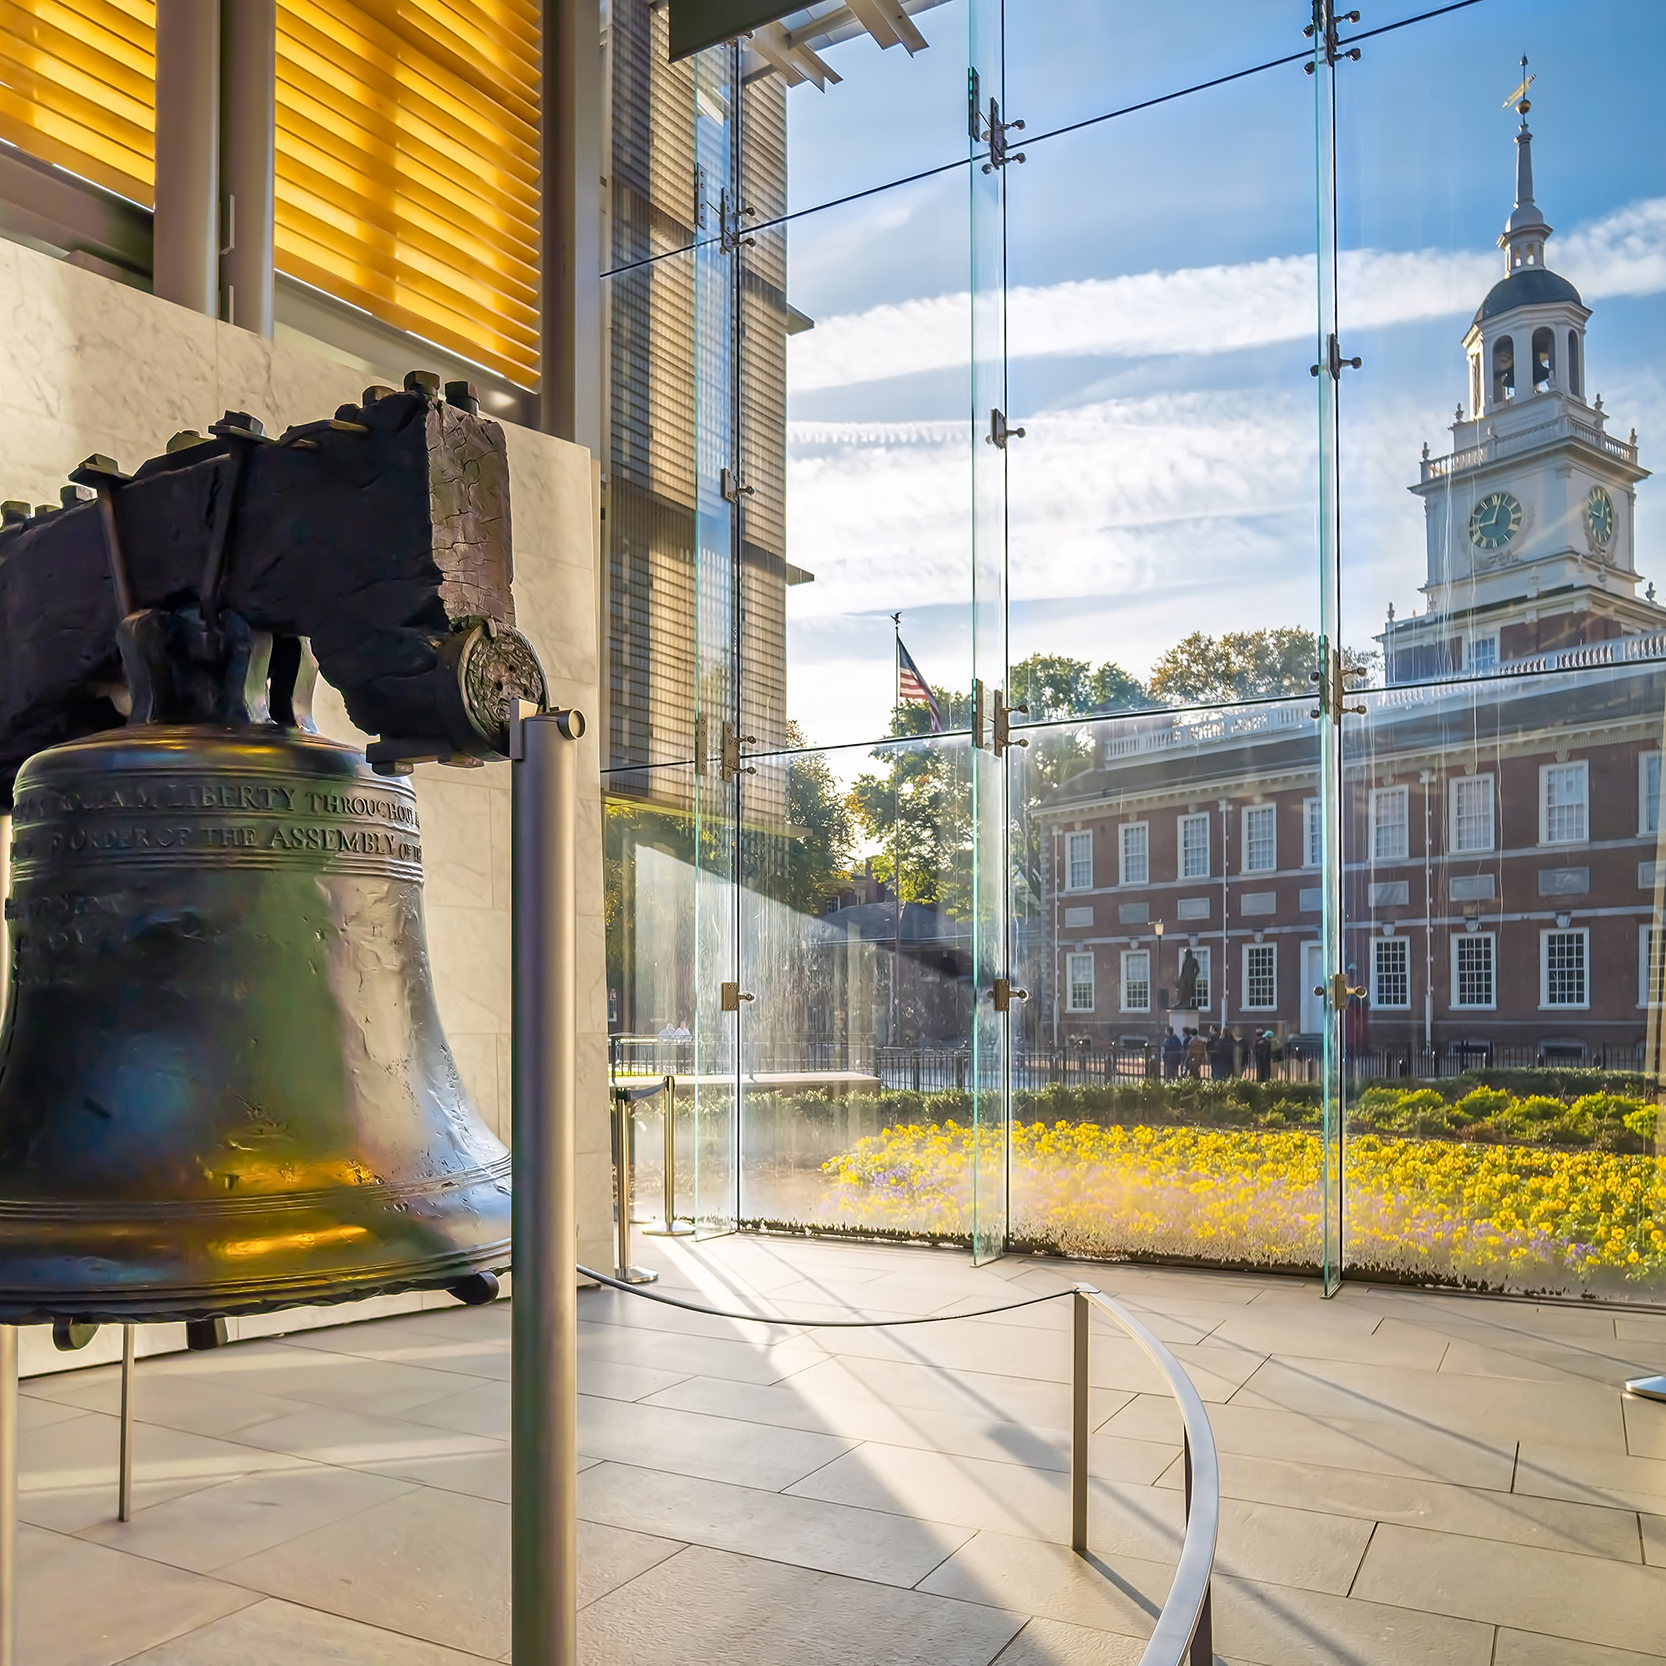 The Liberty bell across from Independence Halll.